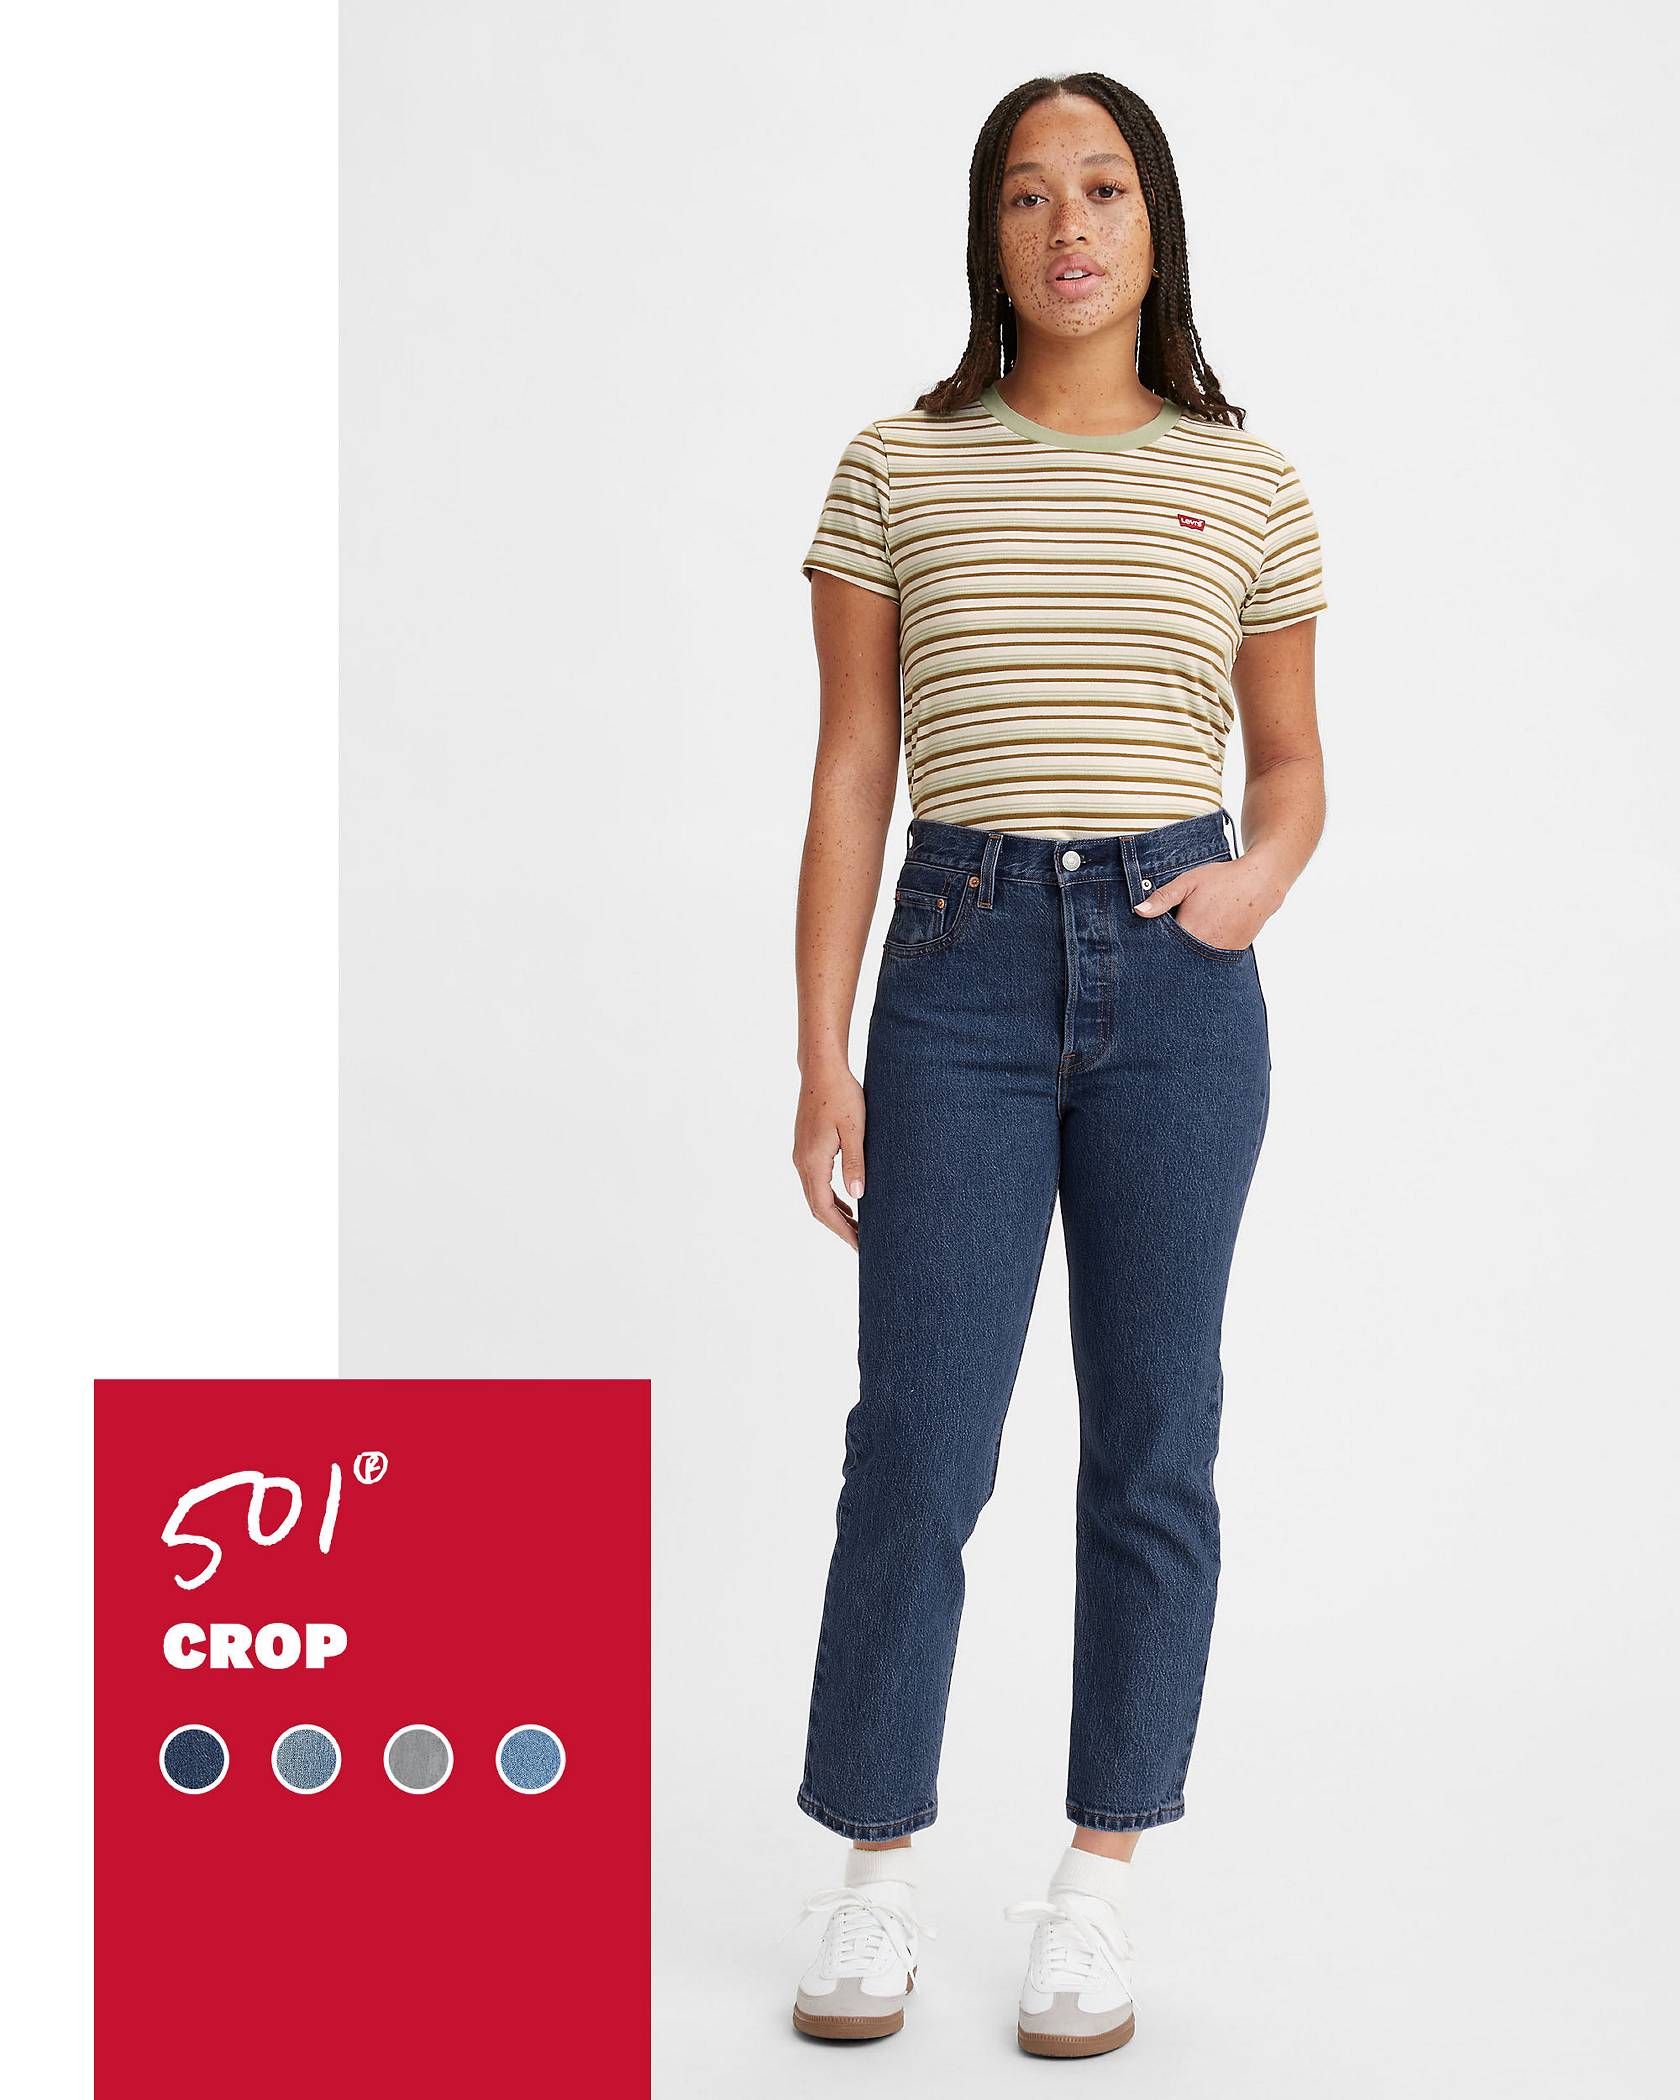 Paneled shot of model in dark wash 501® Crop jeans with a red tag displaying product name and sample color swatches